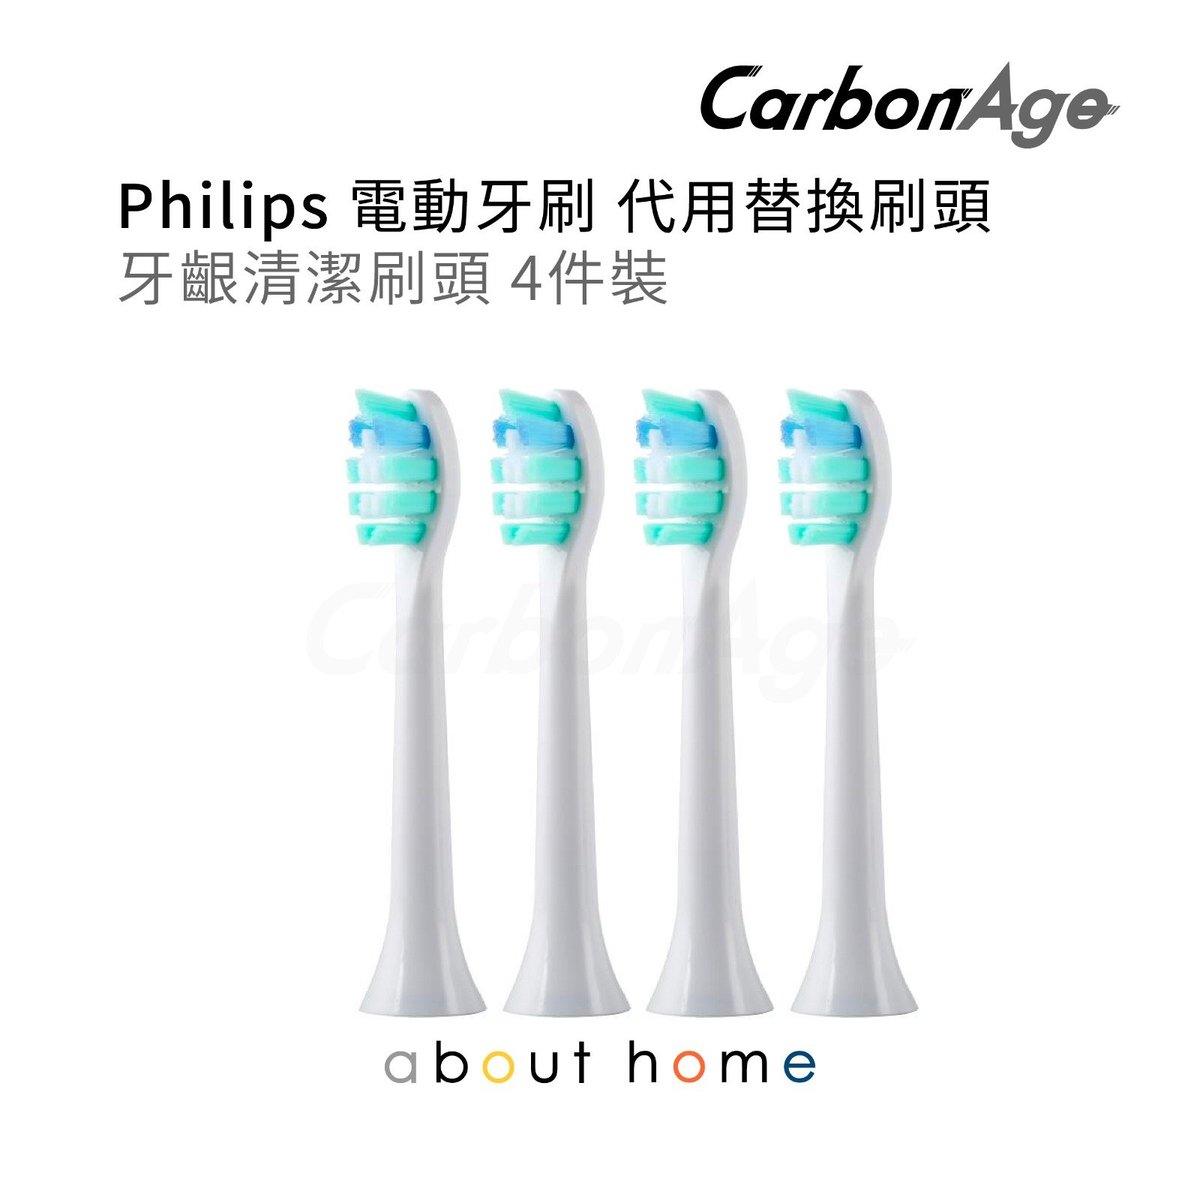 Replacement Toothbrush Head compatible with Philips HX3/6/9 Series (4pcs) Clean [F11]